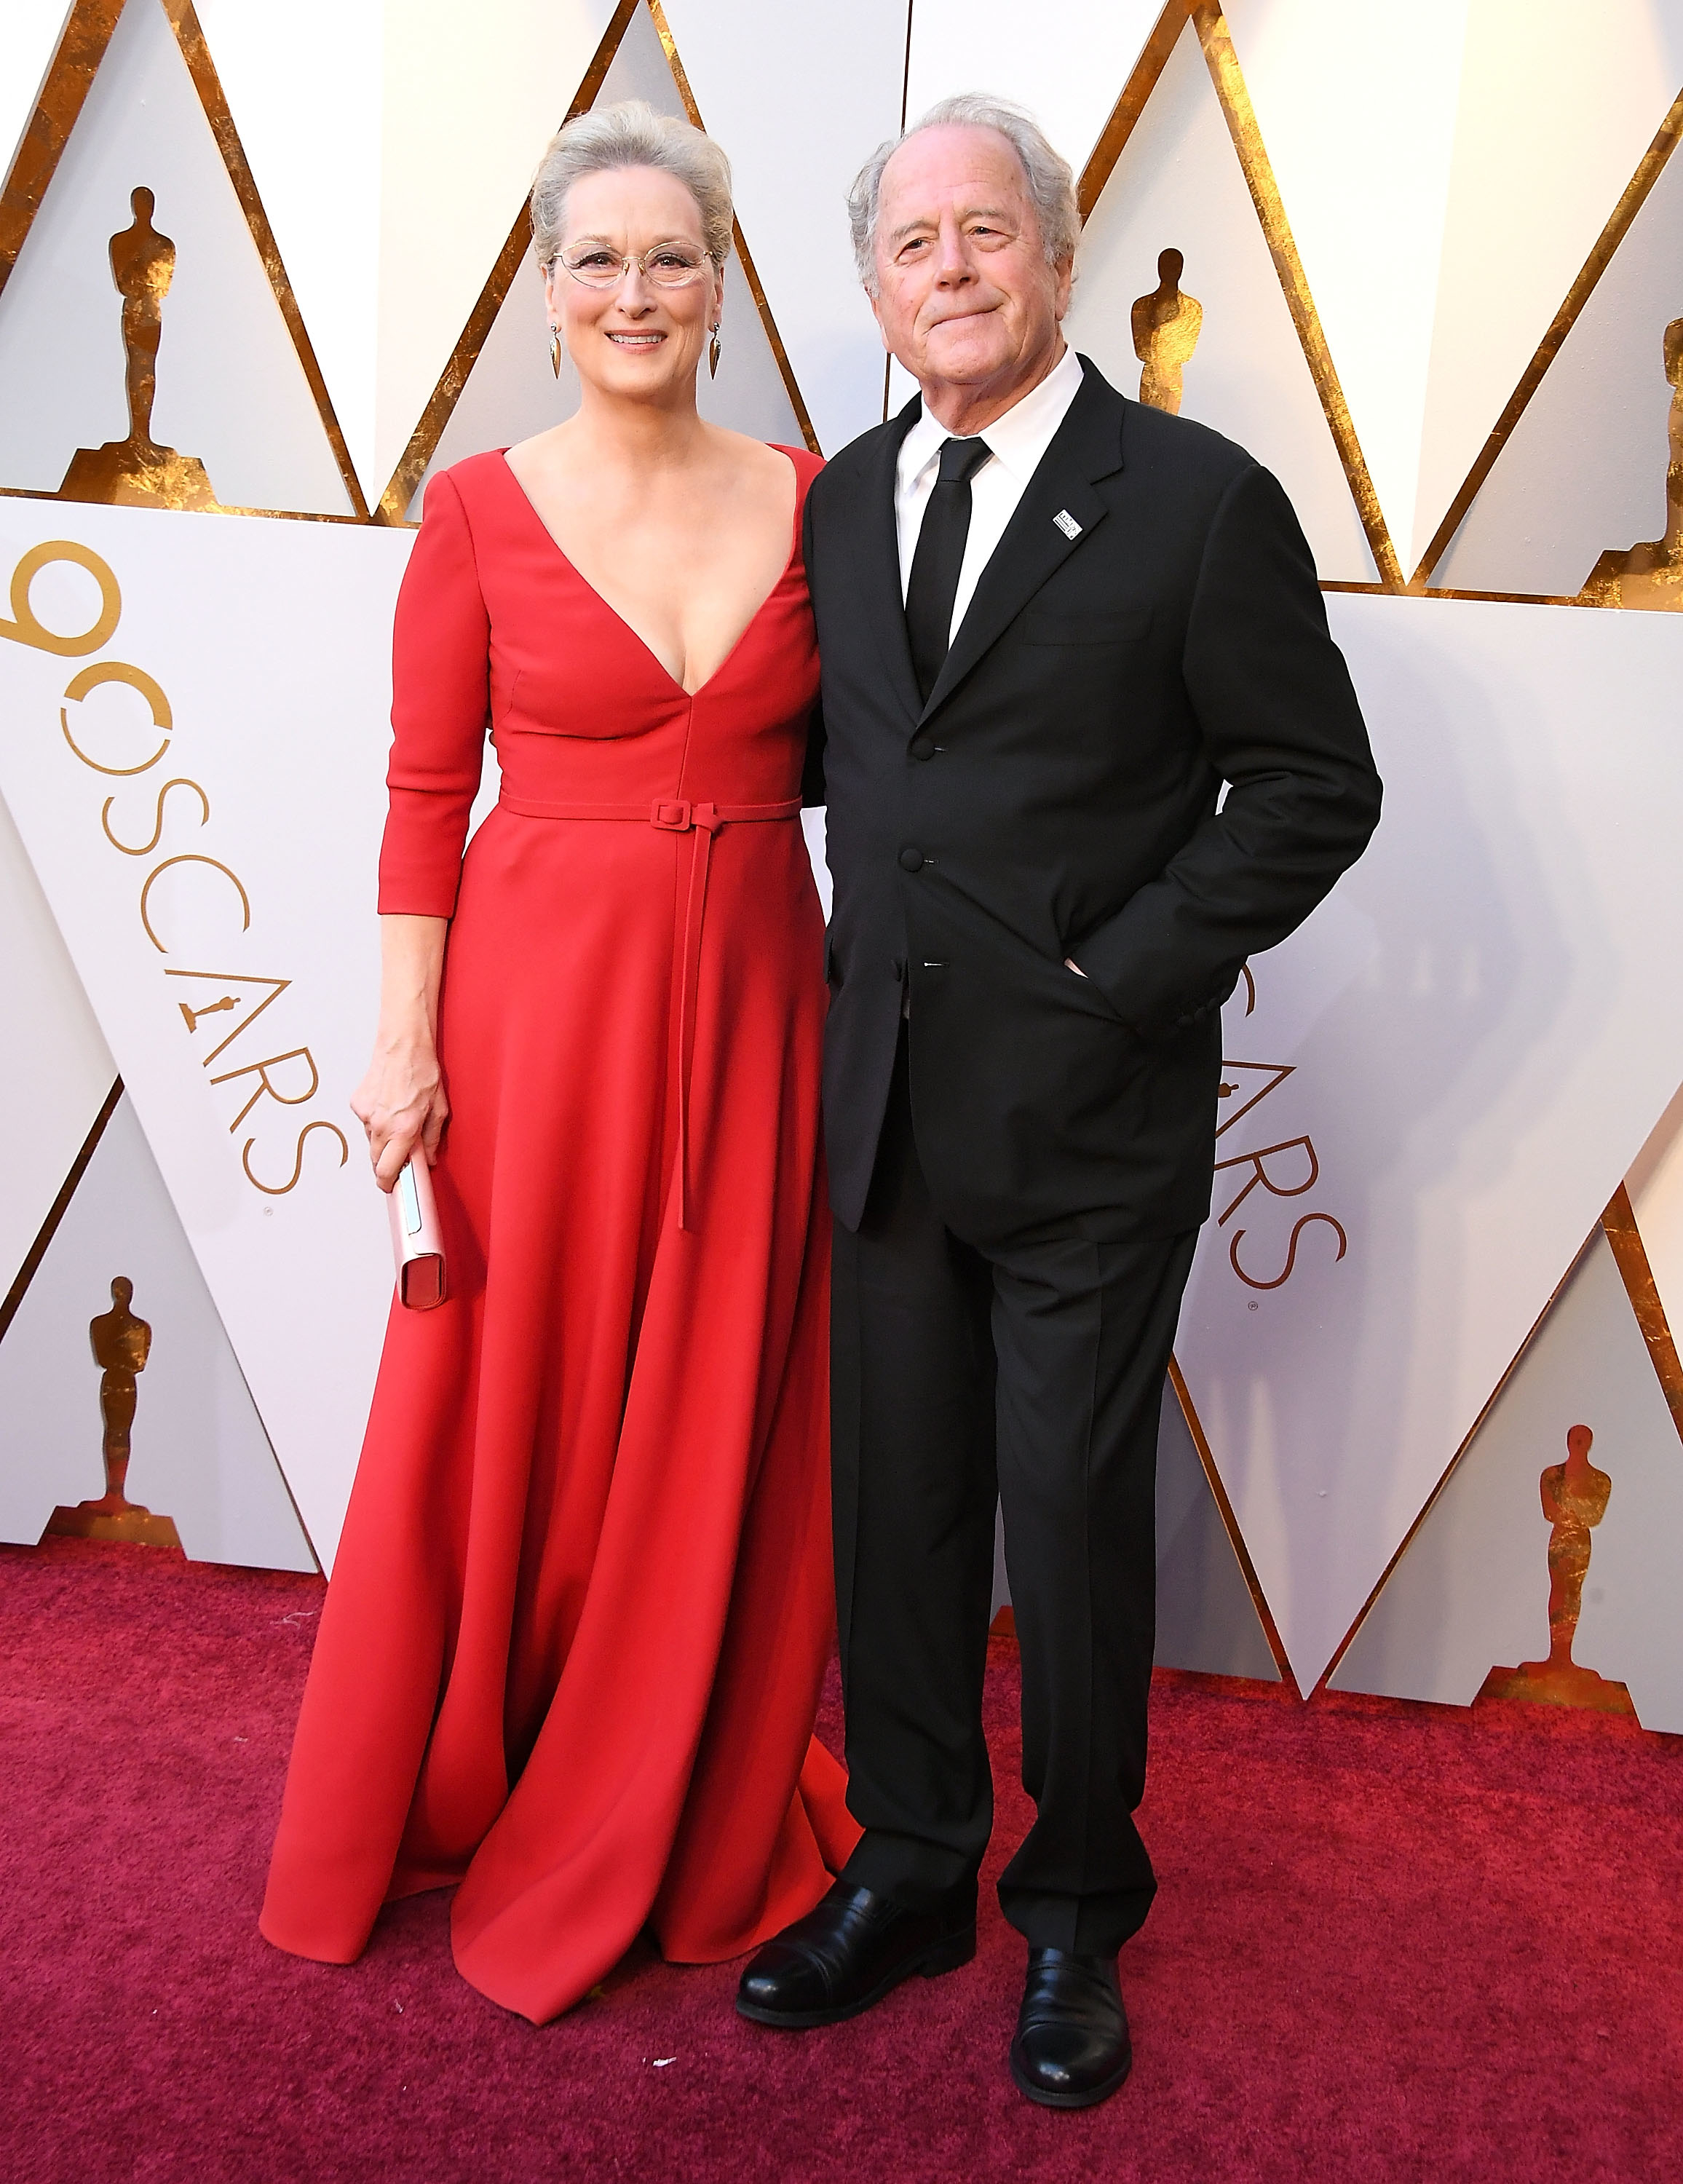 Meryl Streep in a gown and Don Gummer in a suit at the Oscars